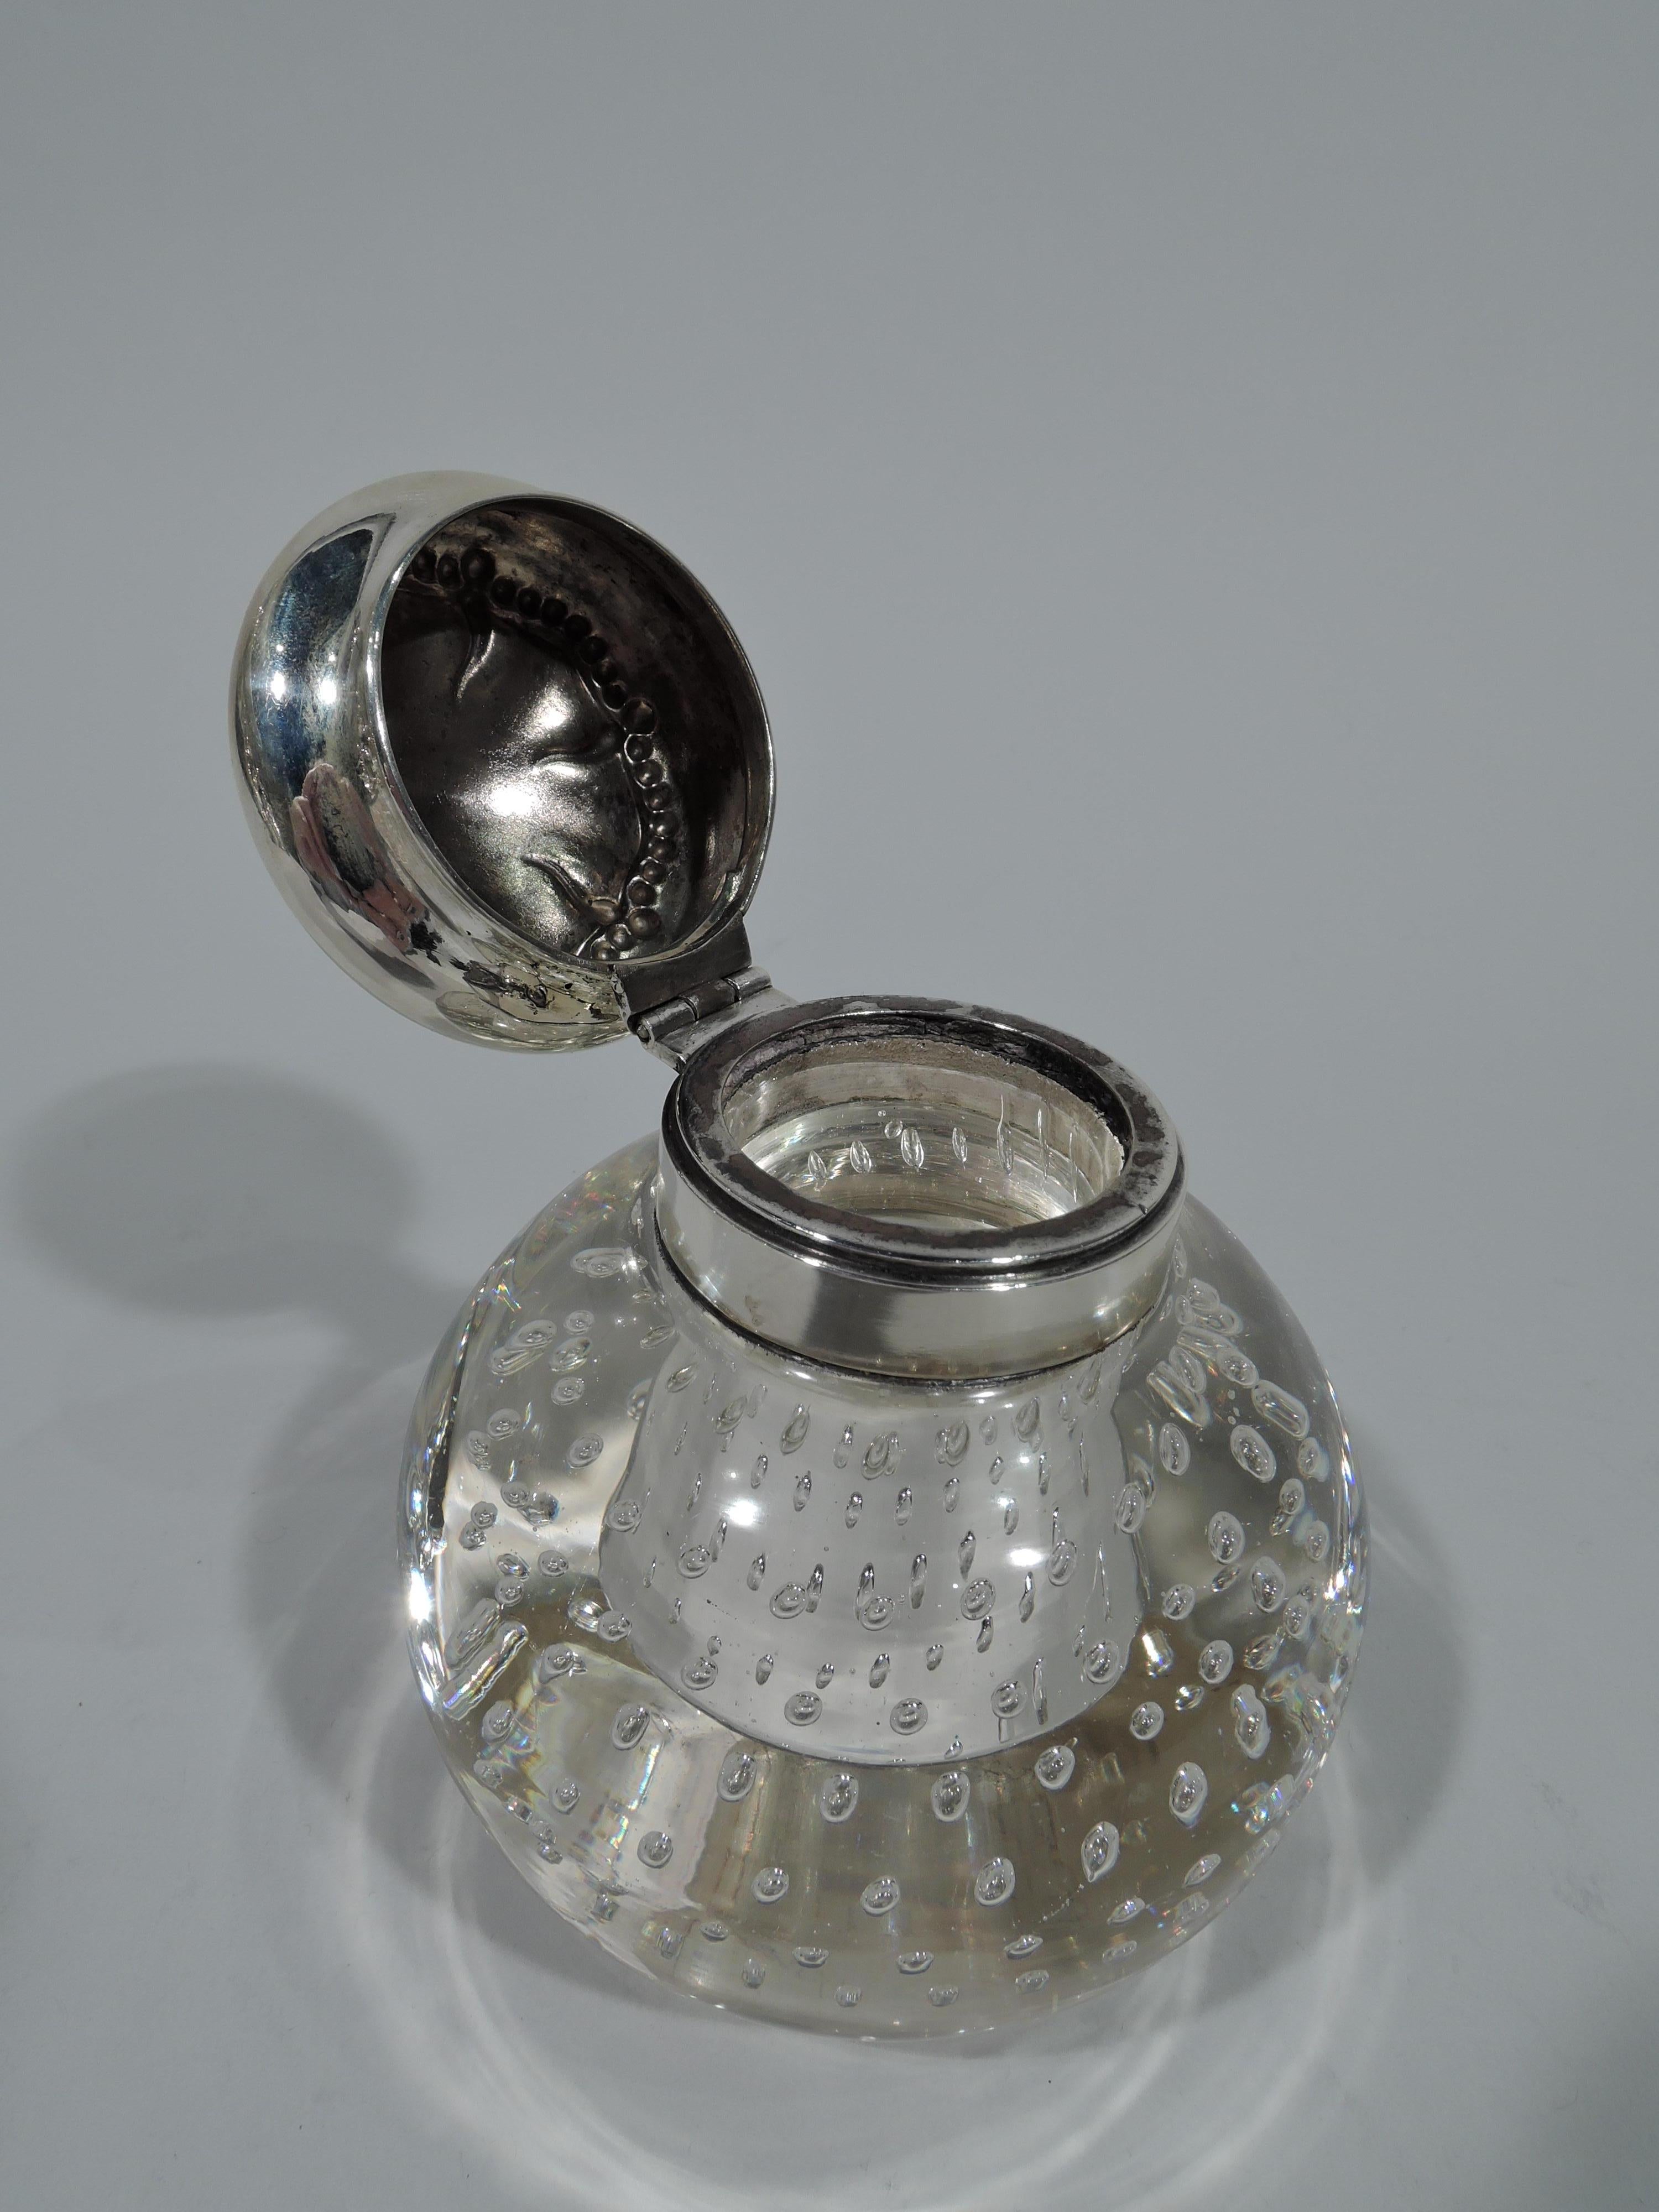 Antique American Sterling Silver and Pairpoint Glass Inkwell (Art nouveau)